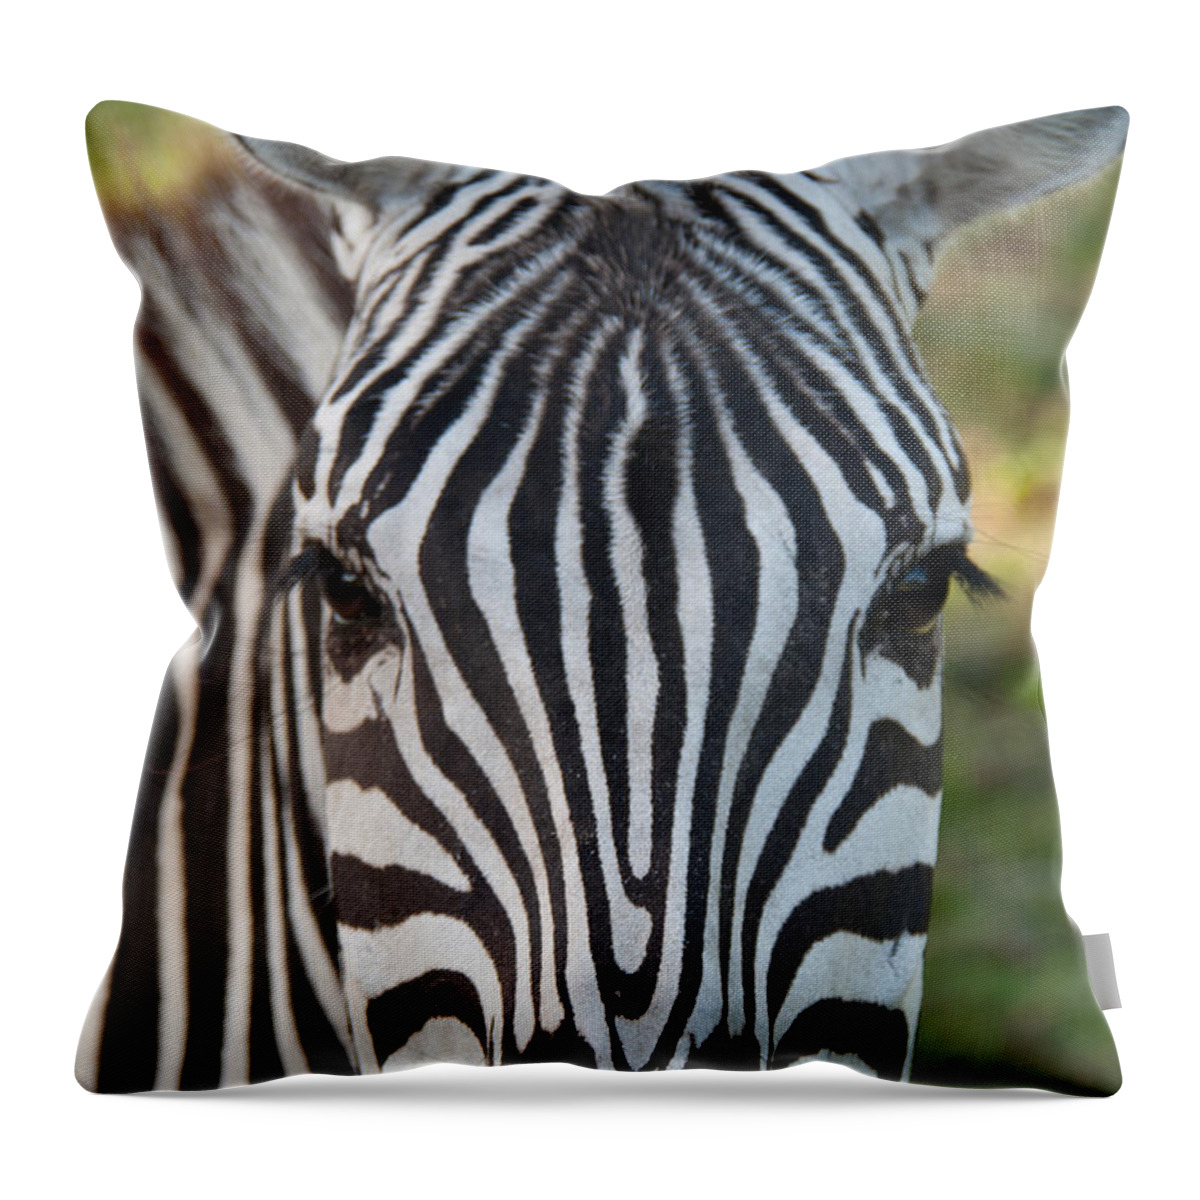 Zebra Throw Pillow featuring the photograph Stripes by John Black